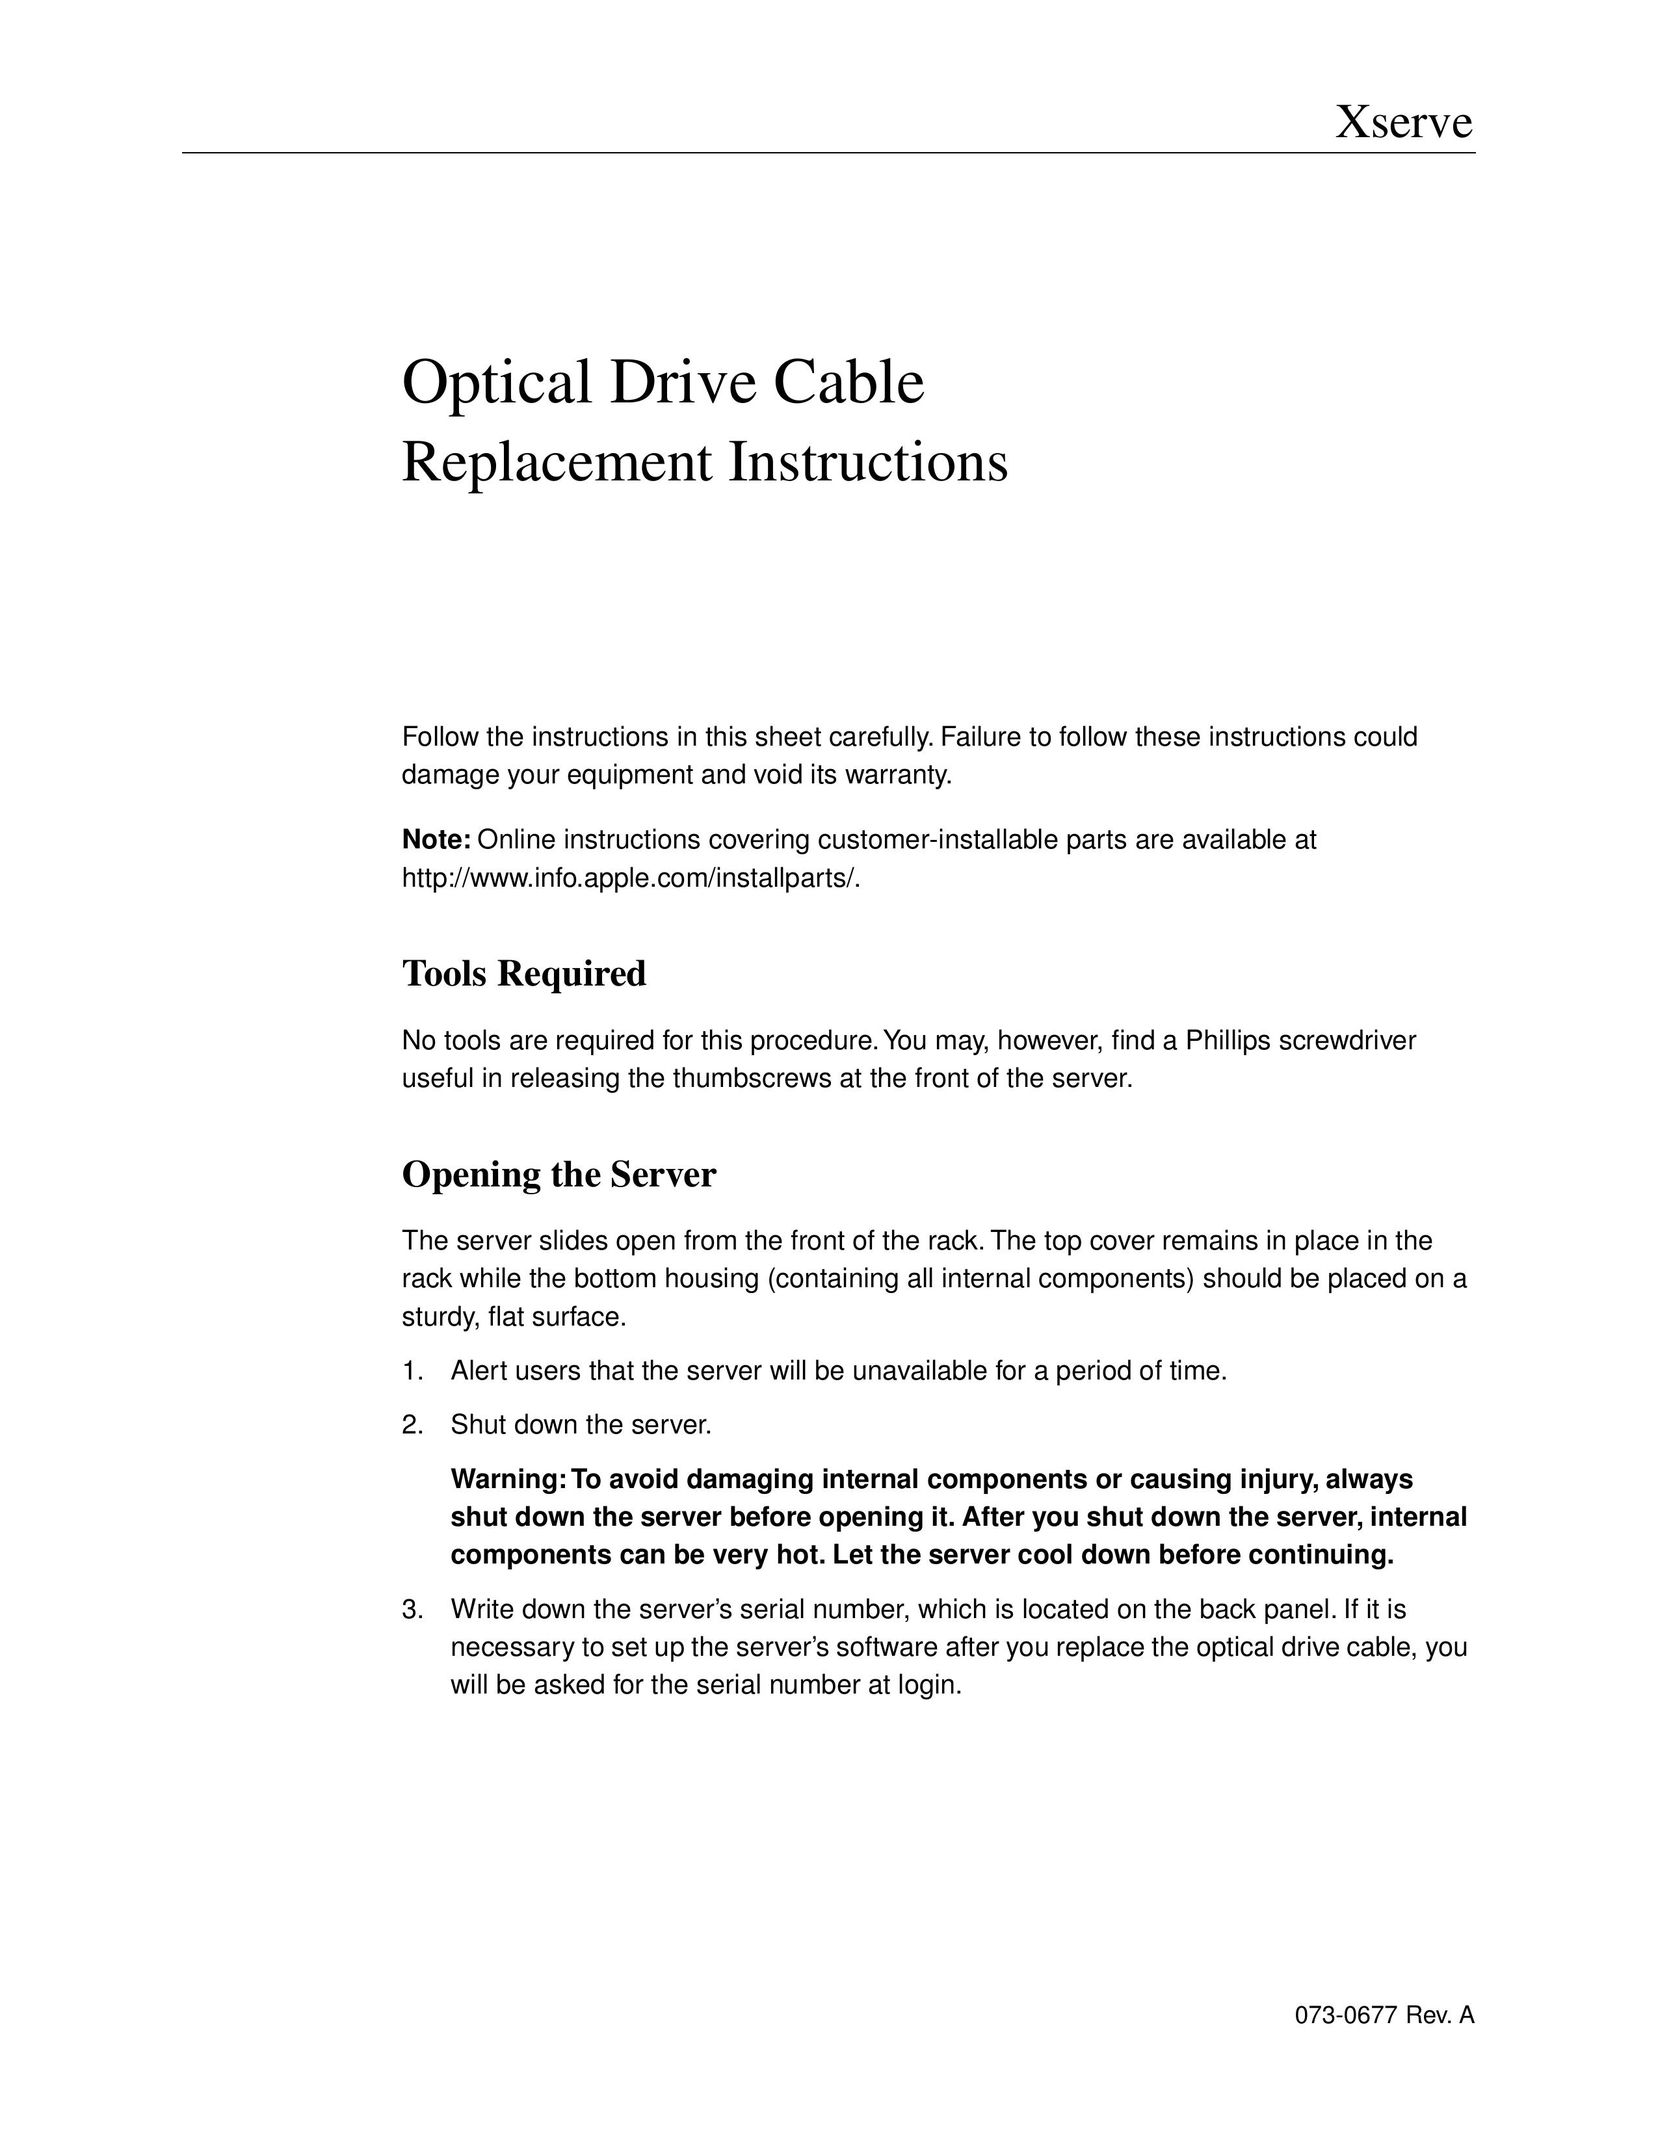 Apple Optical Drive Cable Computer Hardware User Manual